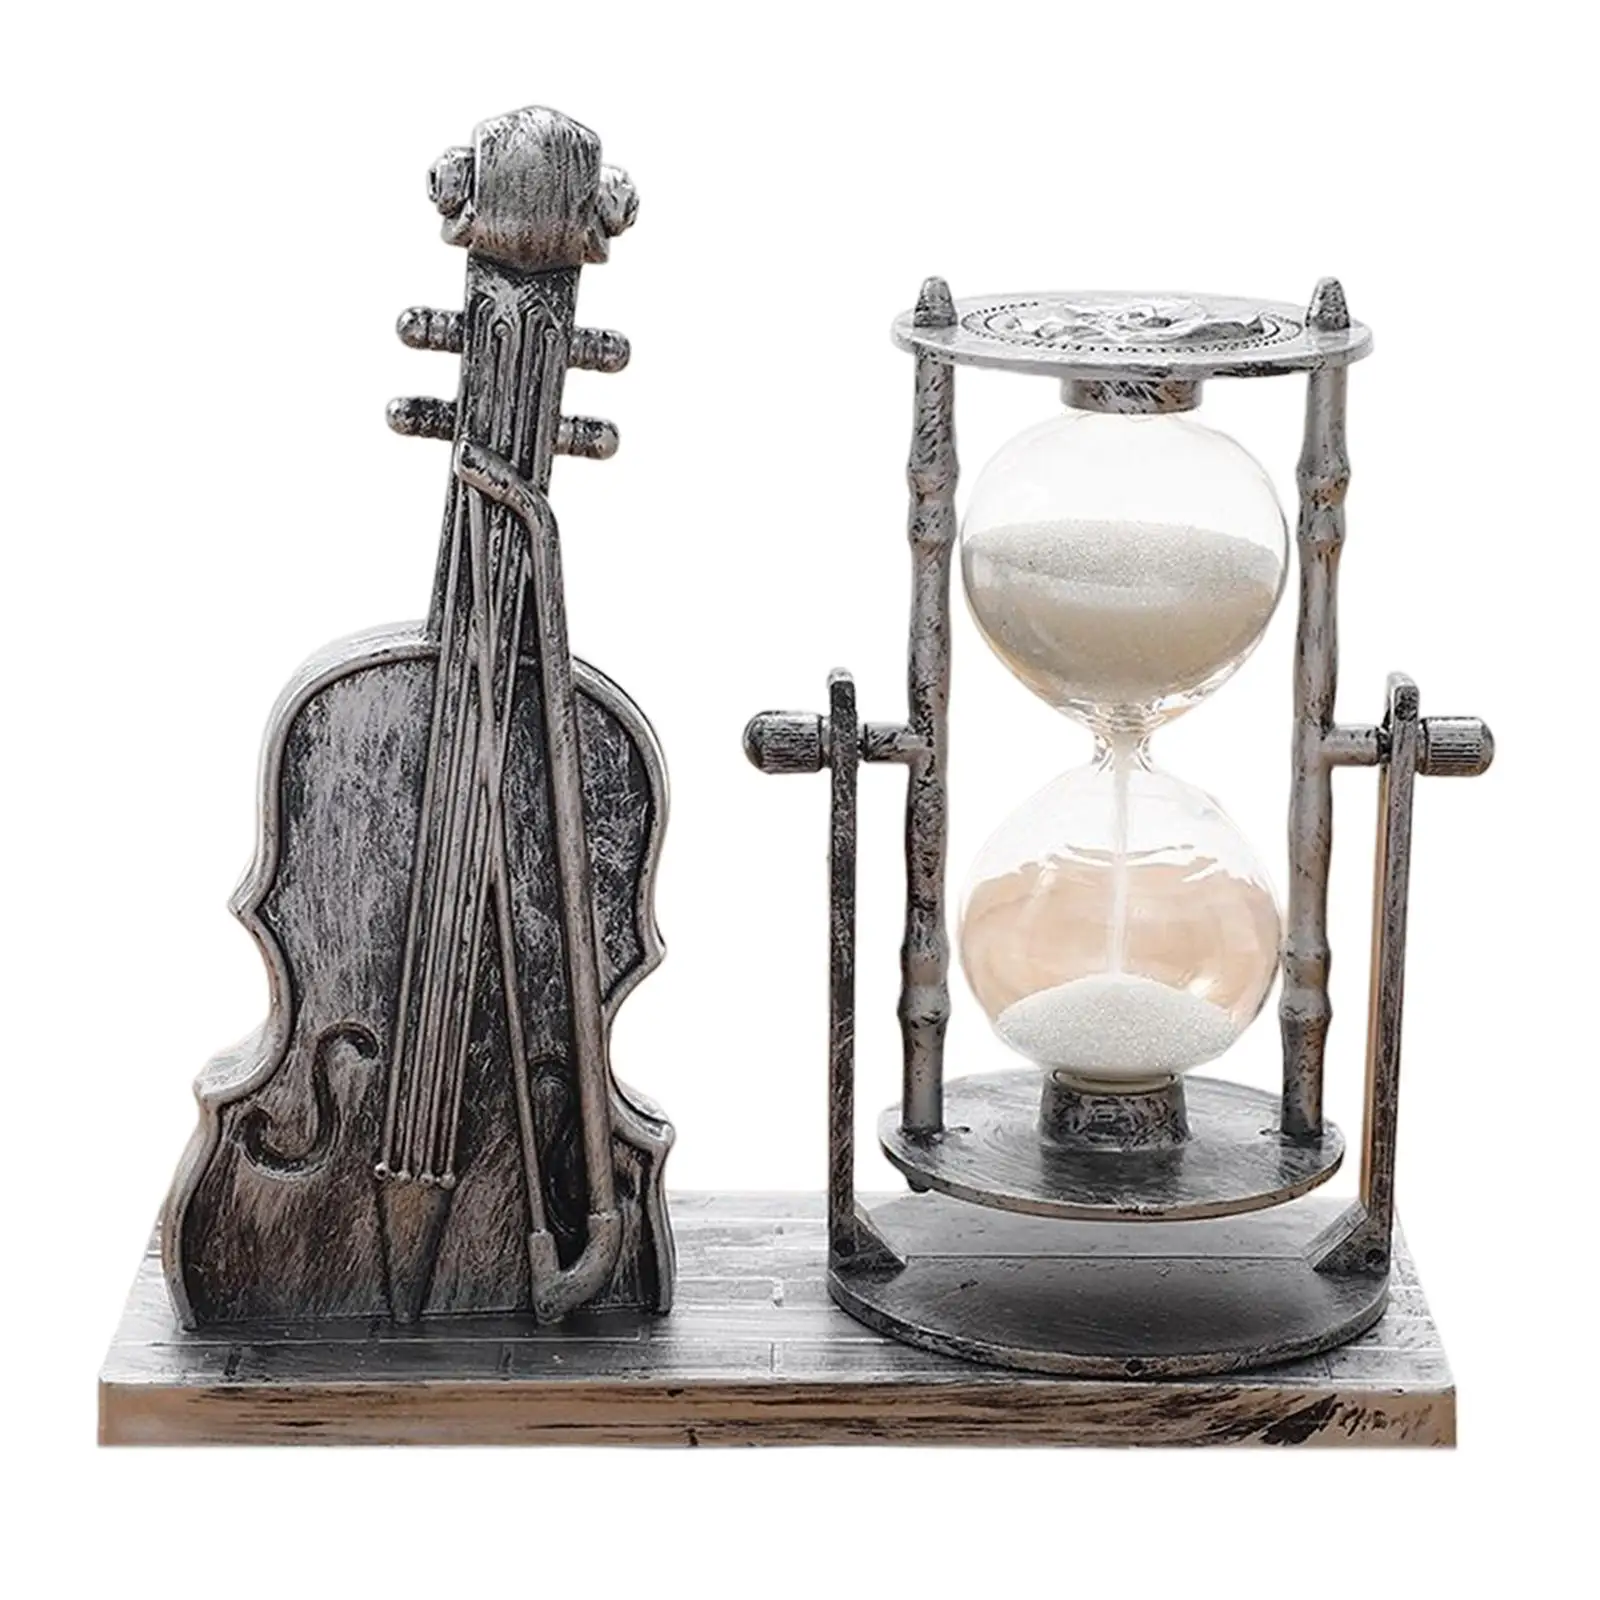 Hourglass Violin Sculpture Collectible Sand Glass Quicksand Vintage Ornament Beautiful for Table Holiday Yard Wedding